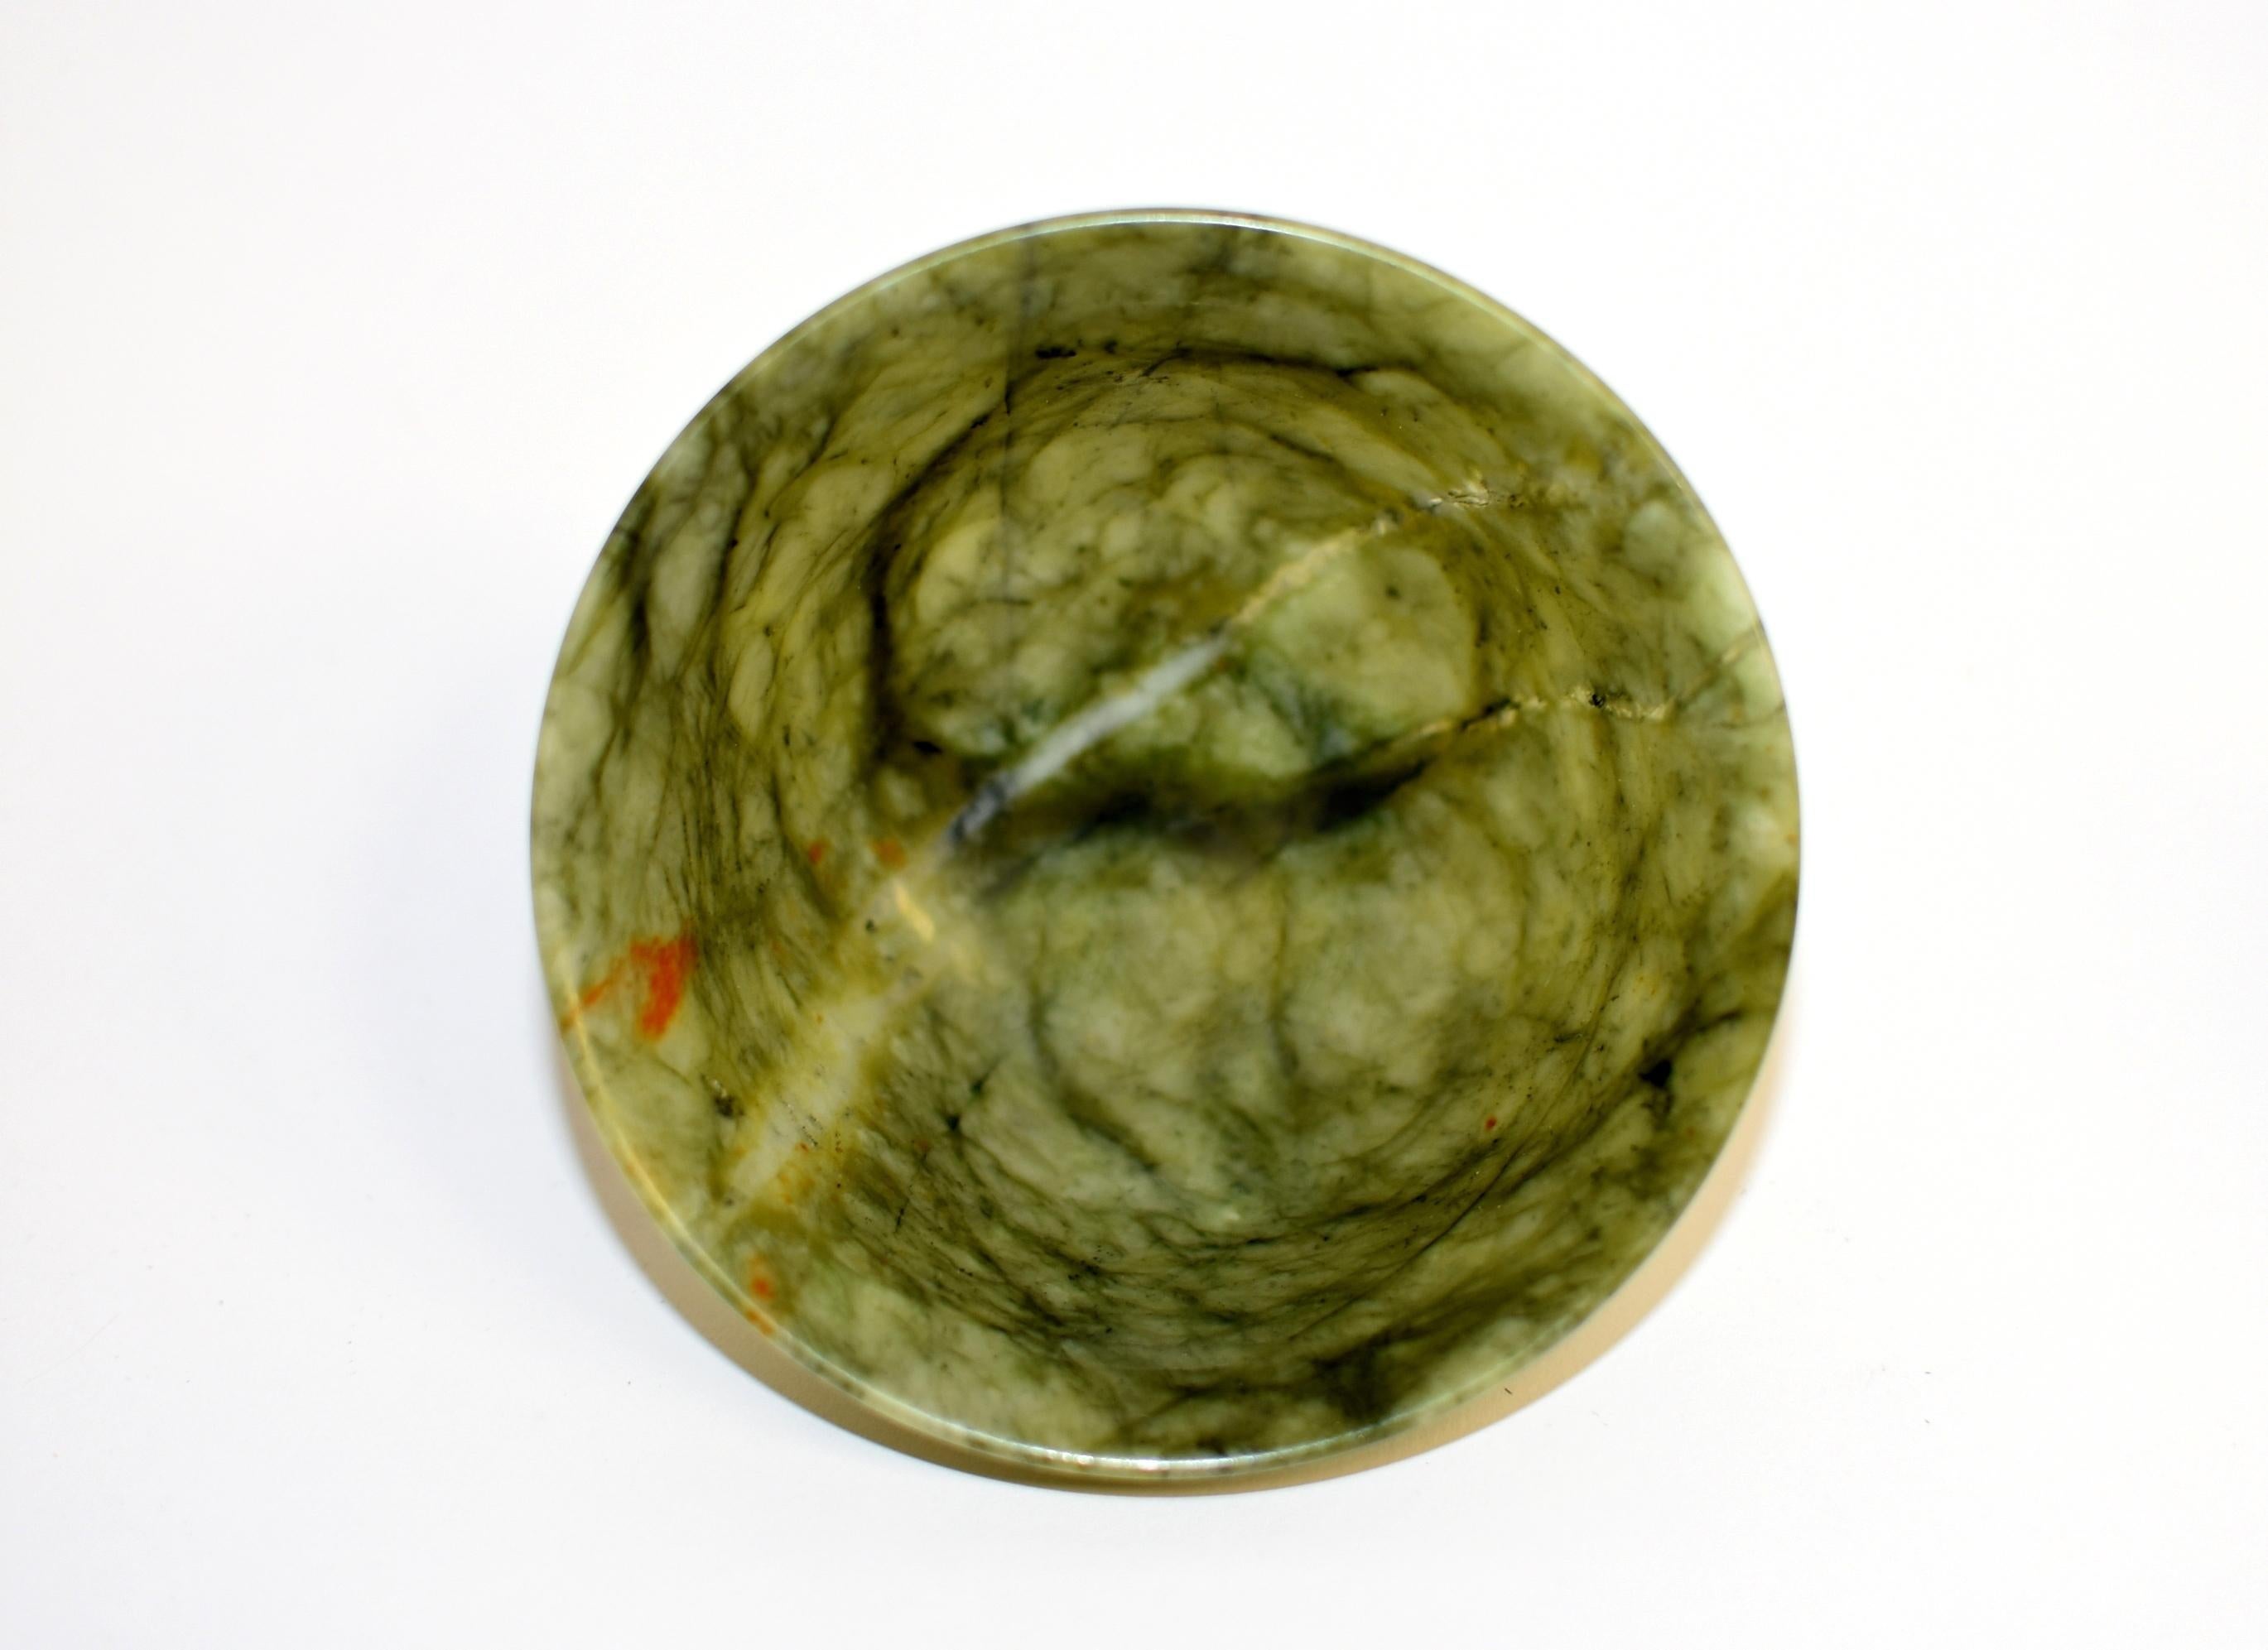 Pair of Serpentine Bowls Heaven and Earth 10